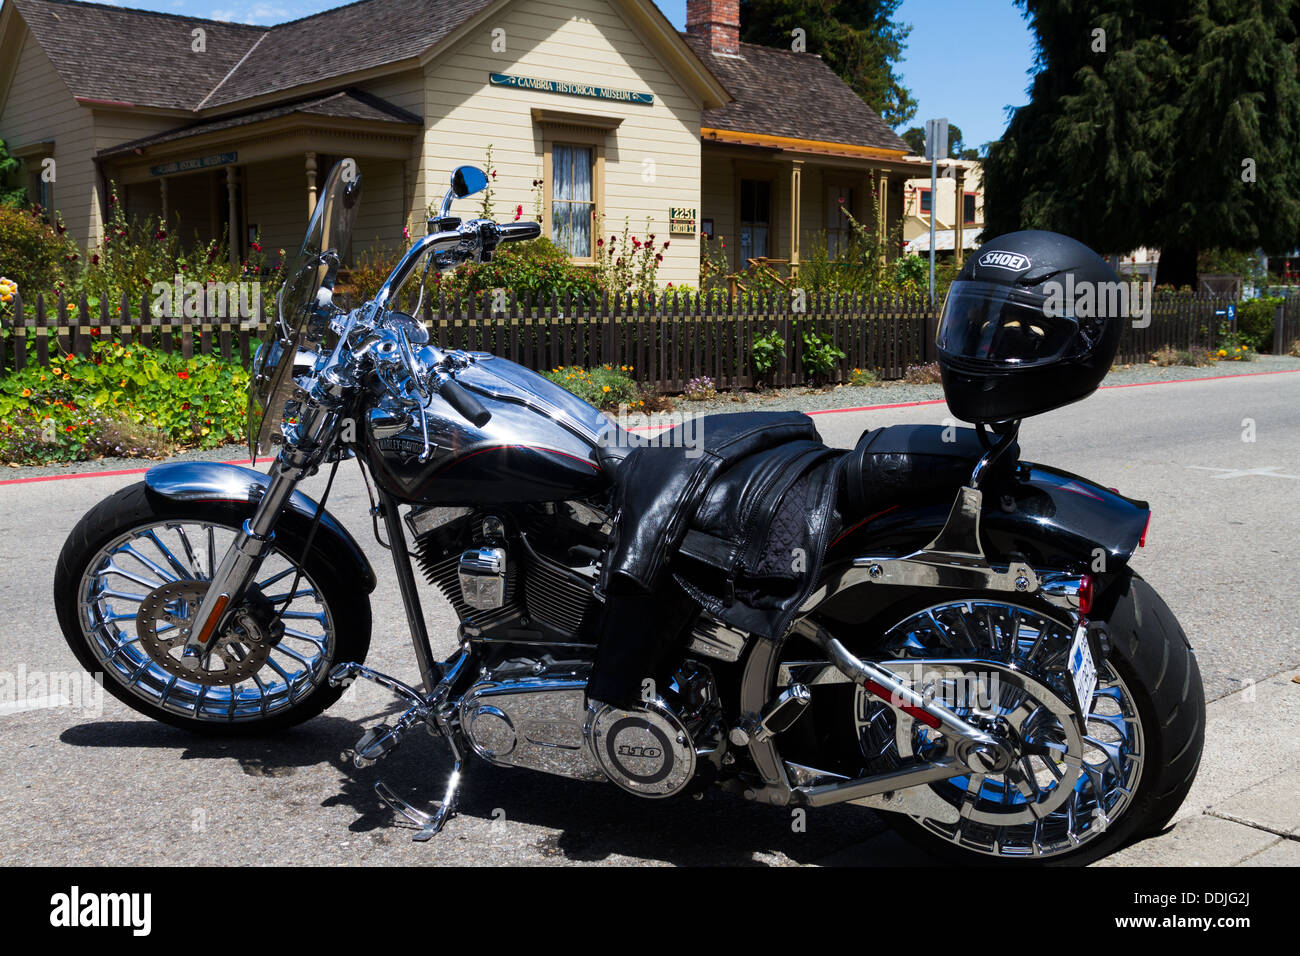 Beautiful Harley Davidson Motorcycle Parked On The Street In Front Of The Cambria Historical Museum Stock Photo Alamy